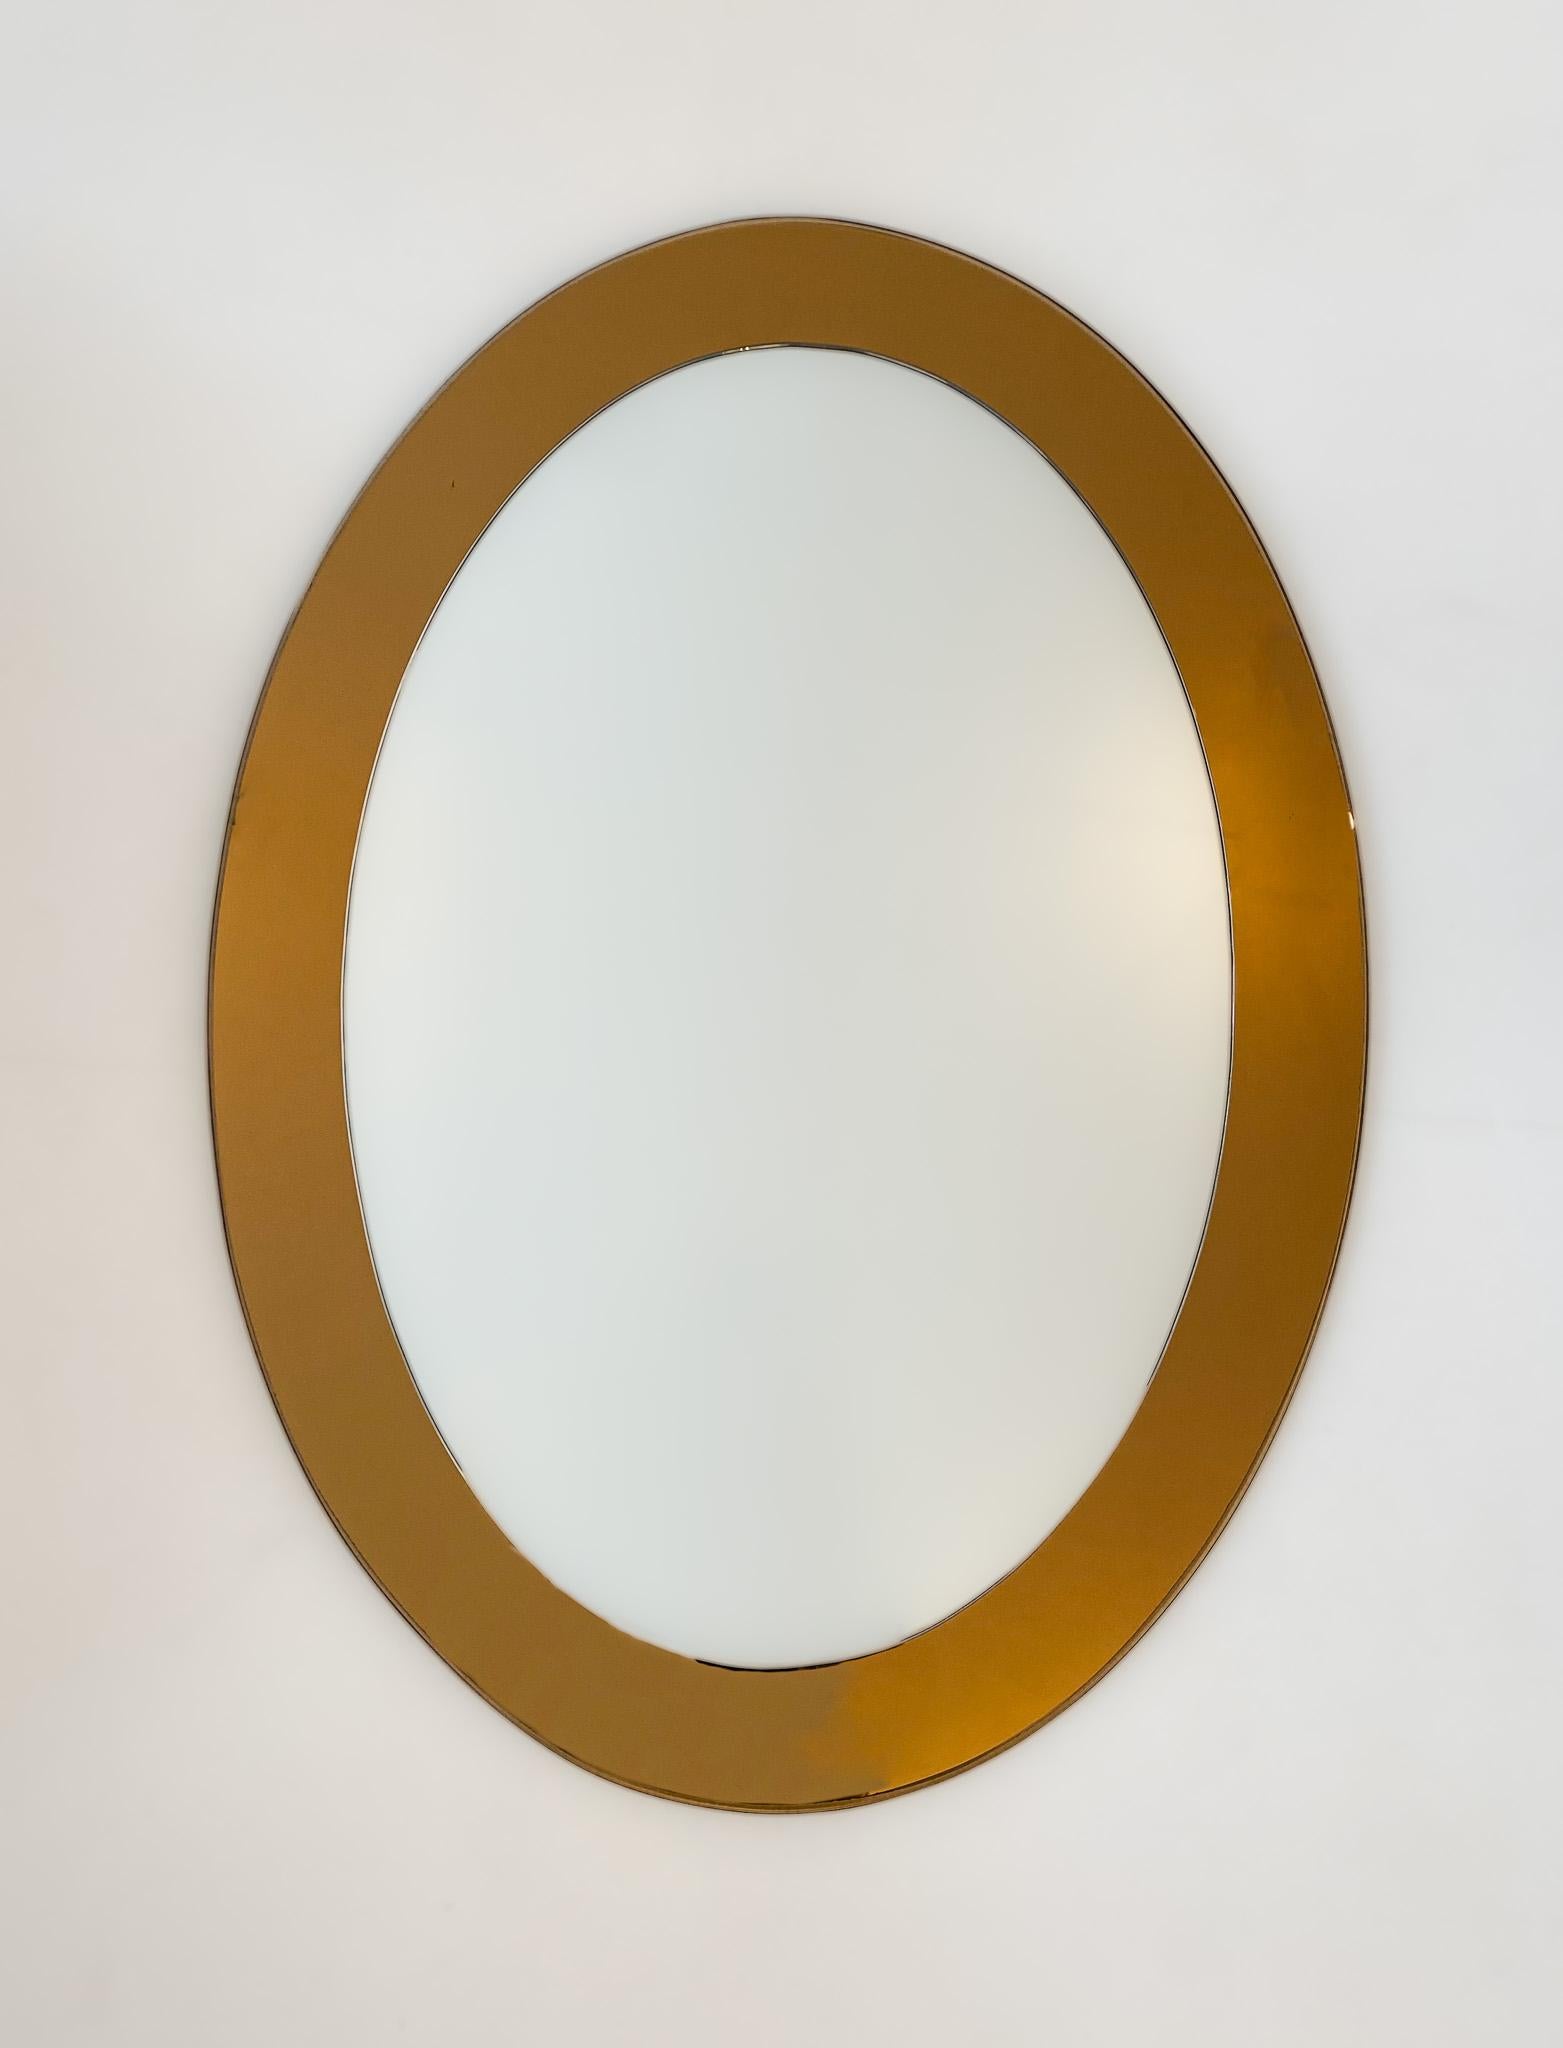 Mid-Century Modern brown oval glass wall mirror, Italy 1970s.

Very elegant oval shaped Italian wall mirror from the 70s. This wall mirror convinces with its frame of brown mirrored crystal glass and its oval shape. The glass of the mirror is very